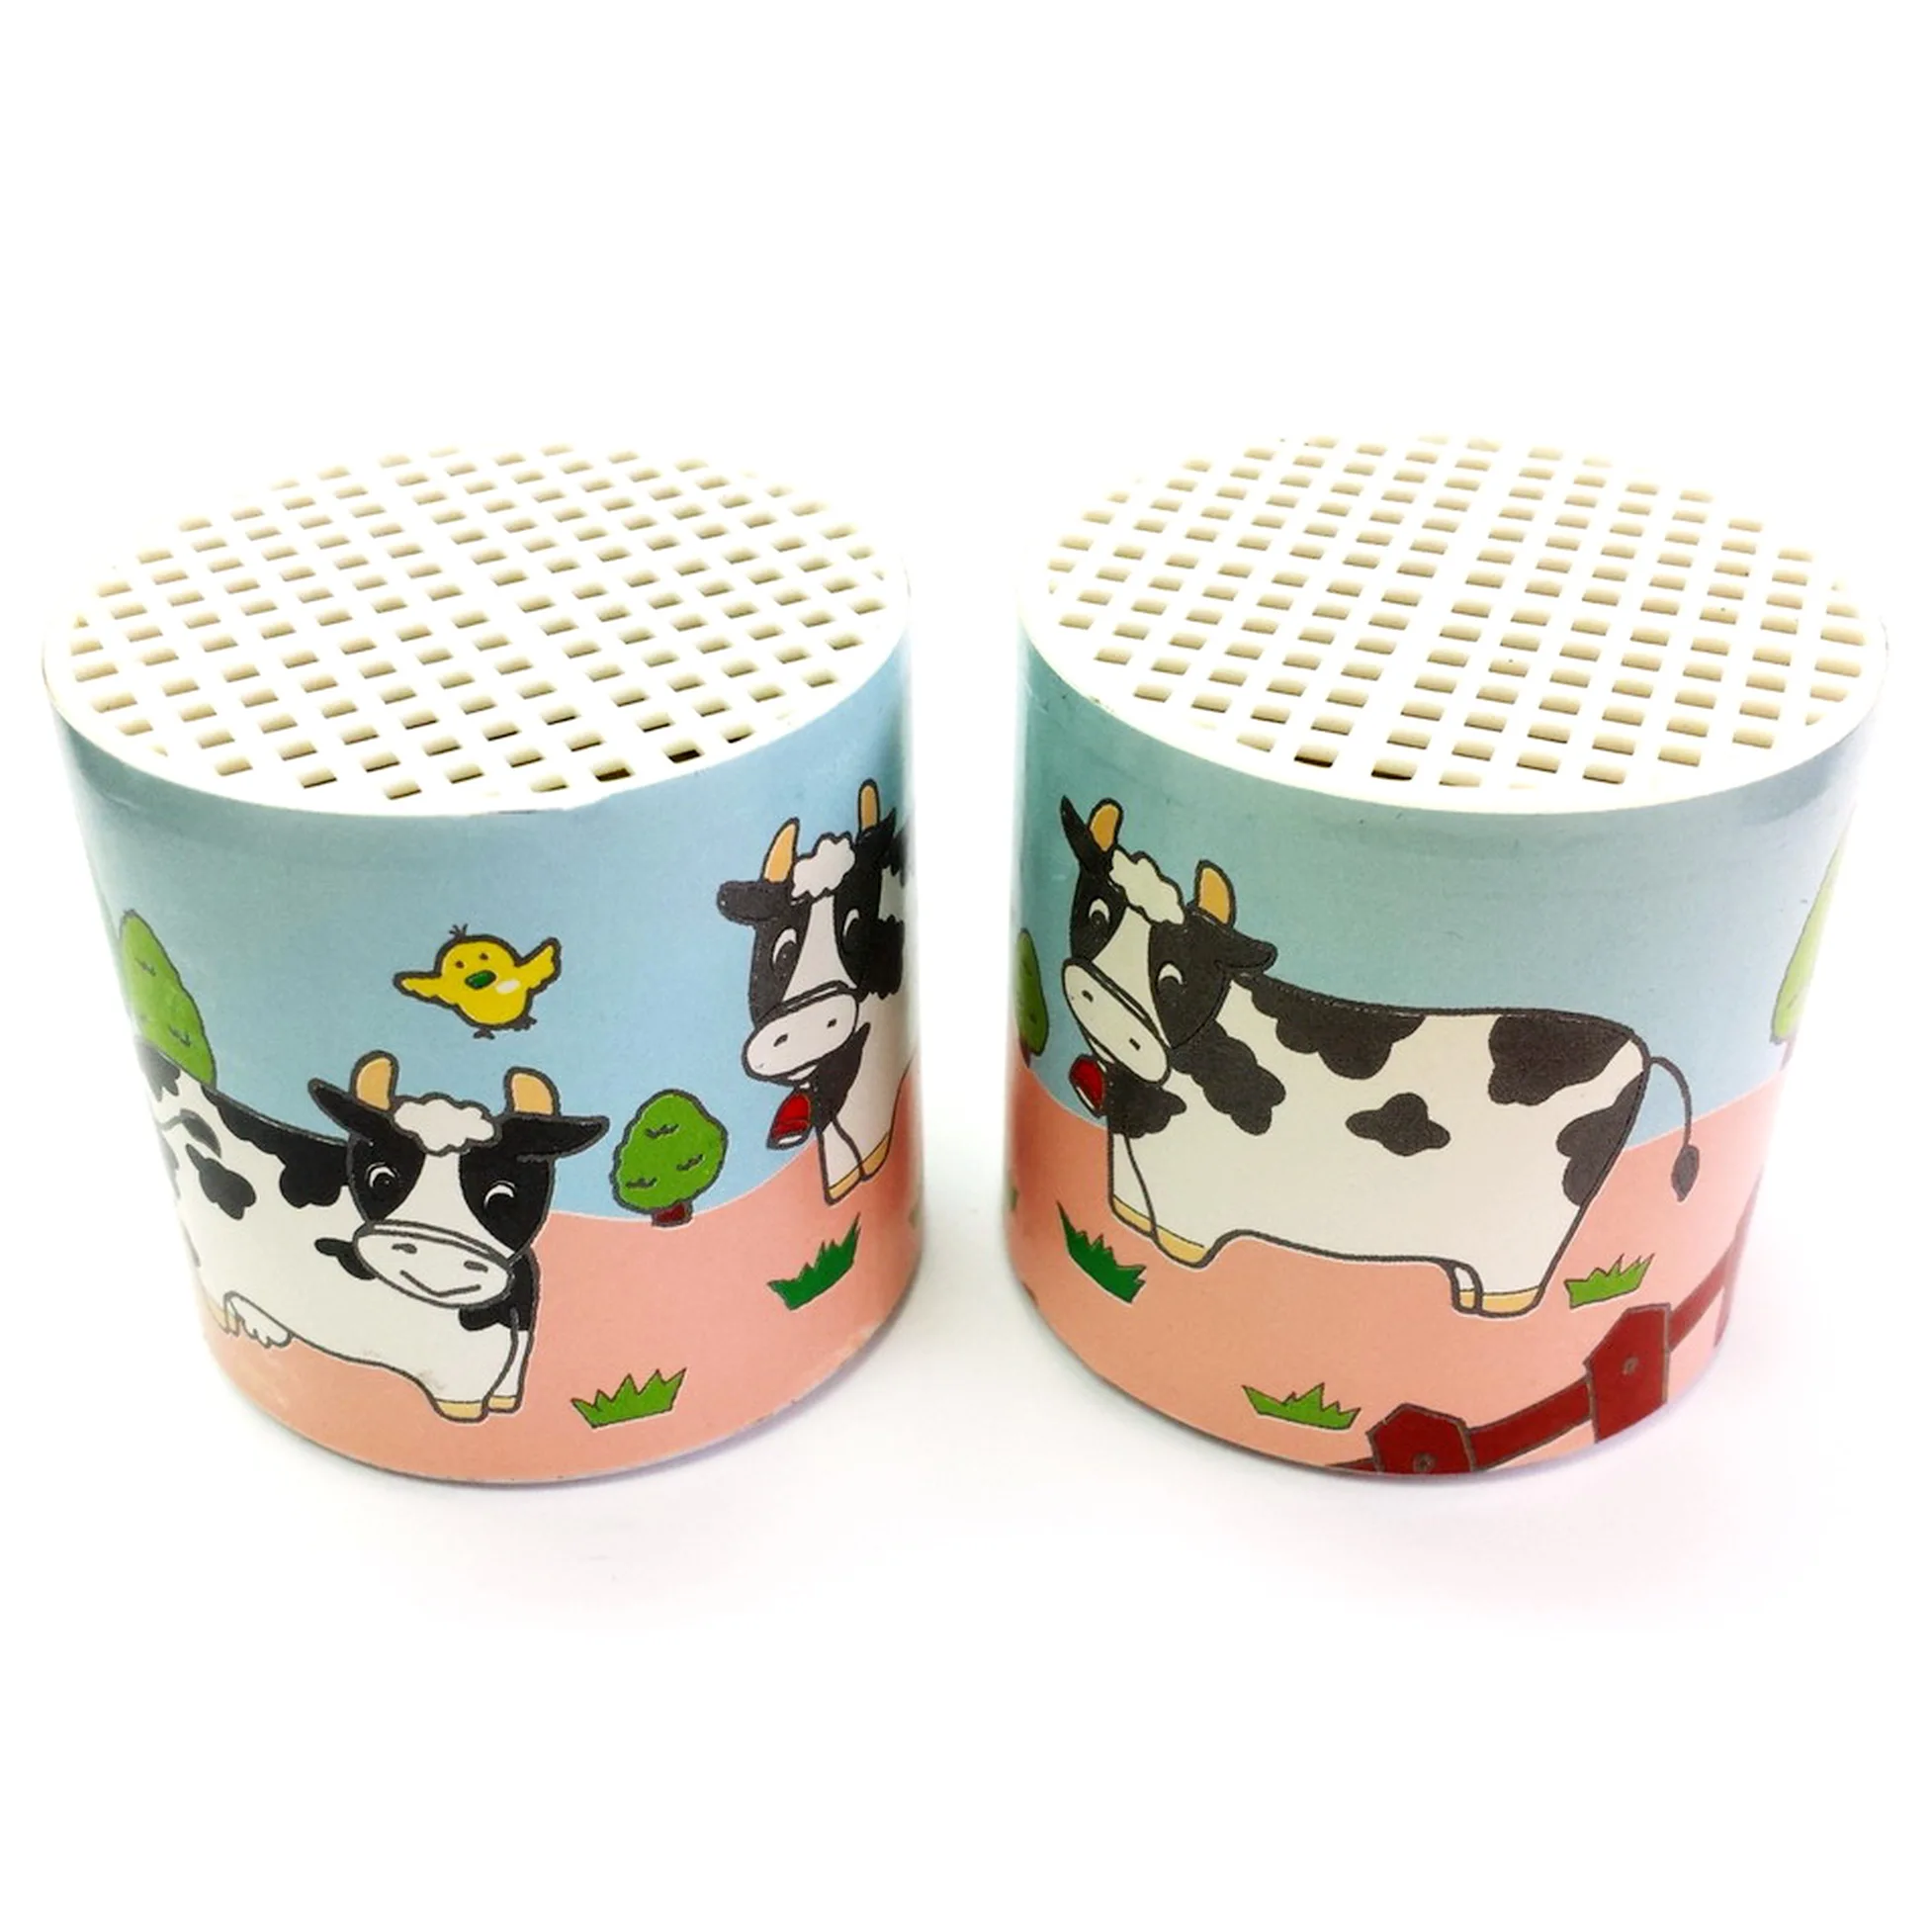 1 pc Deluxe Cow Box Moo Sound Voice Can Noise Maker Birthday Party Toy Favors Novelty Clown Gag Jokes Hallloween Christmas